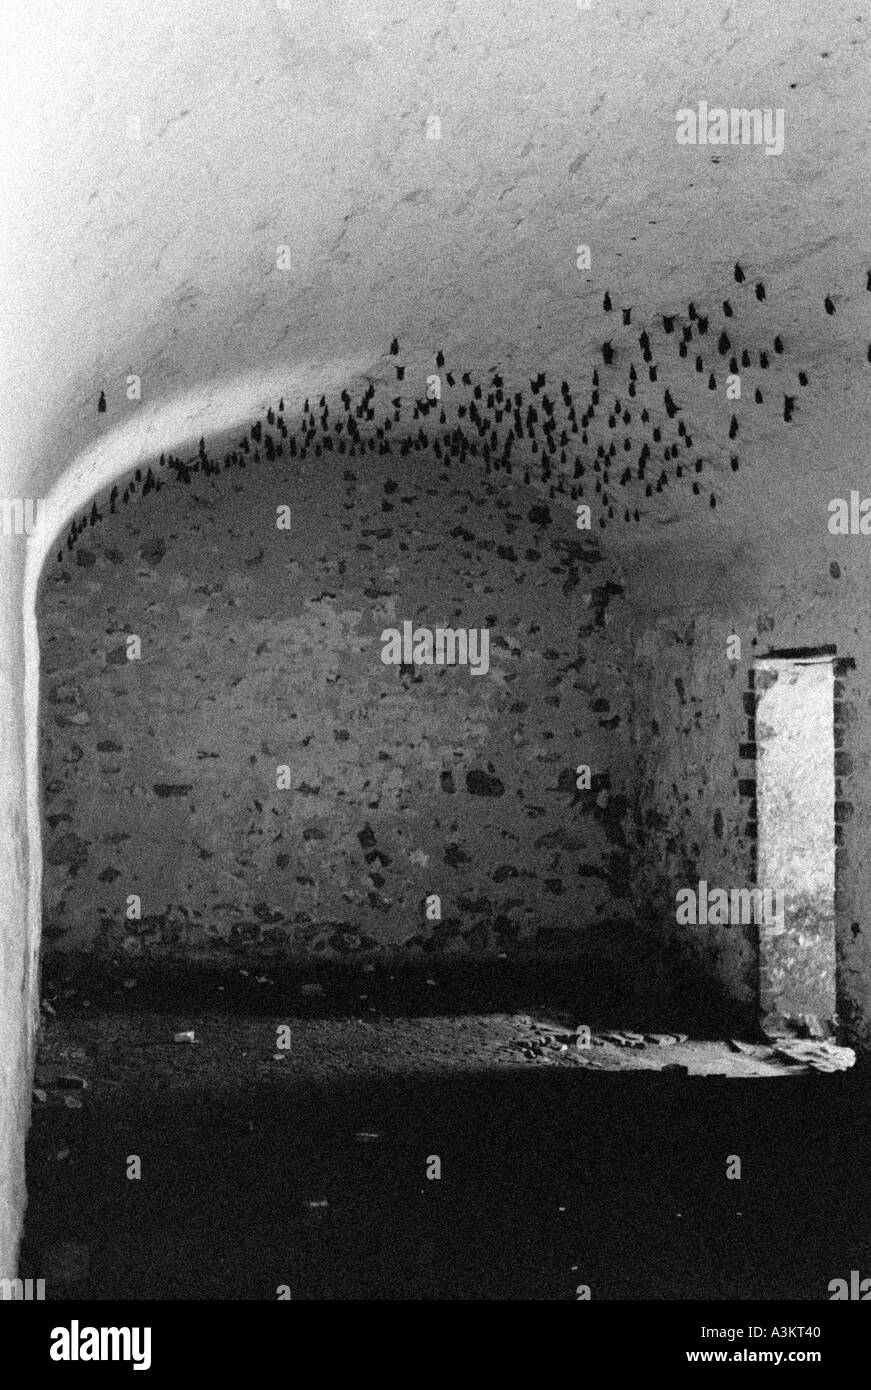 Bats hang upside down in the dungeon of an old slave fort, Ghana. Stock Photo